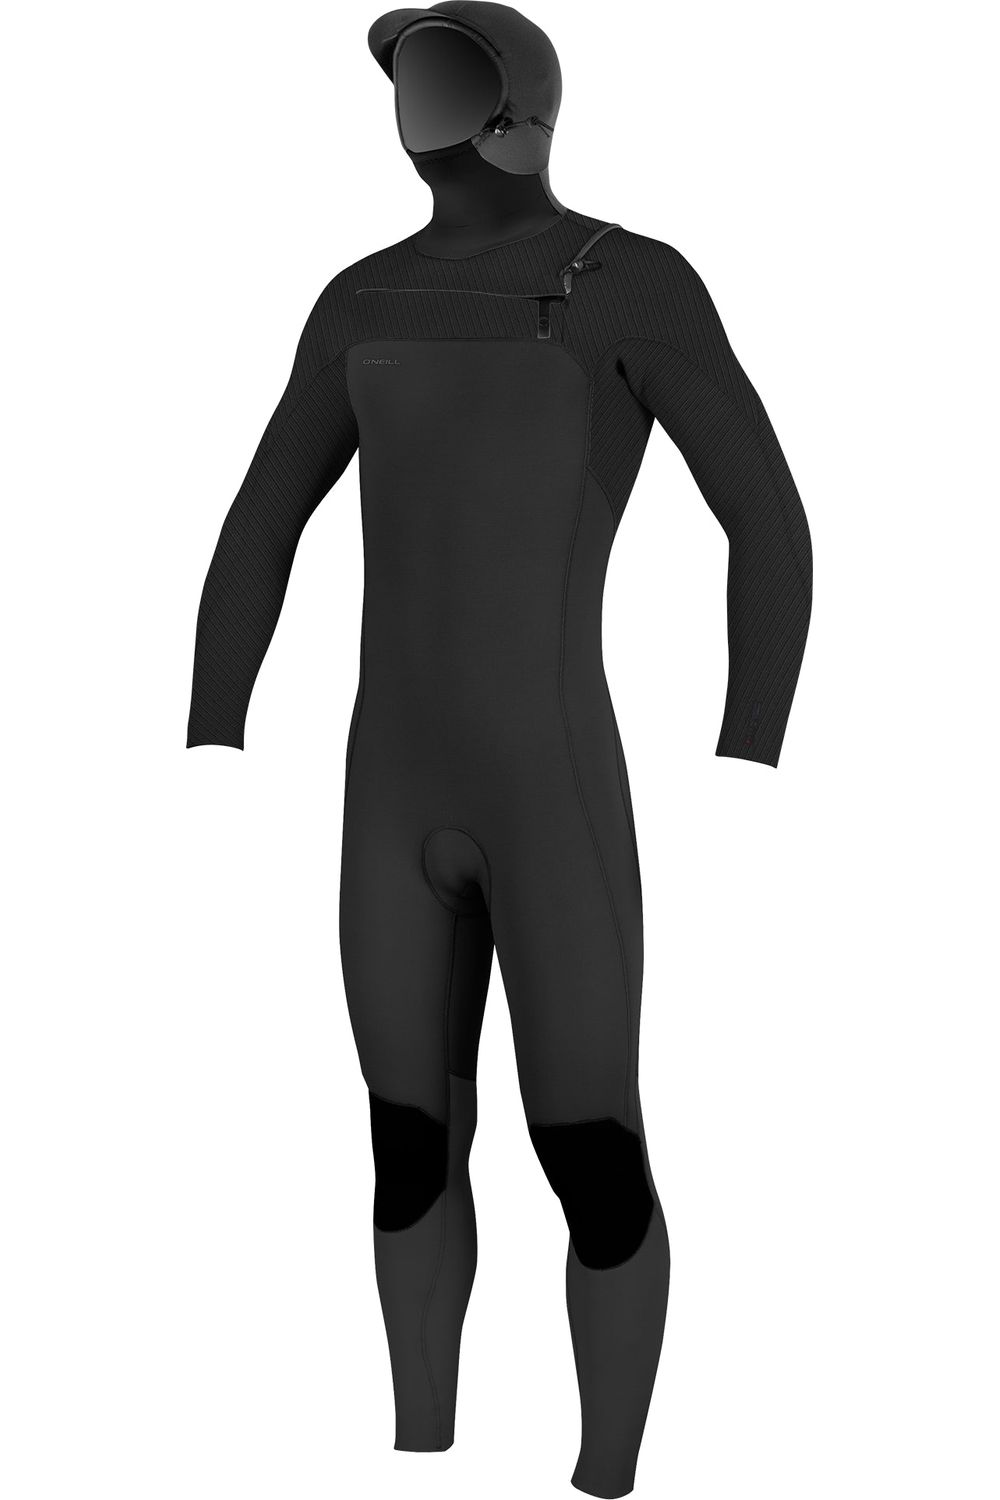 O'Neill Hyperfreak Wetsuit Youth 5/4+ With Chest Zip & Hood In Black